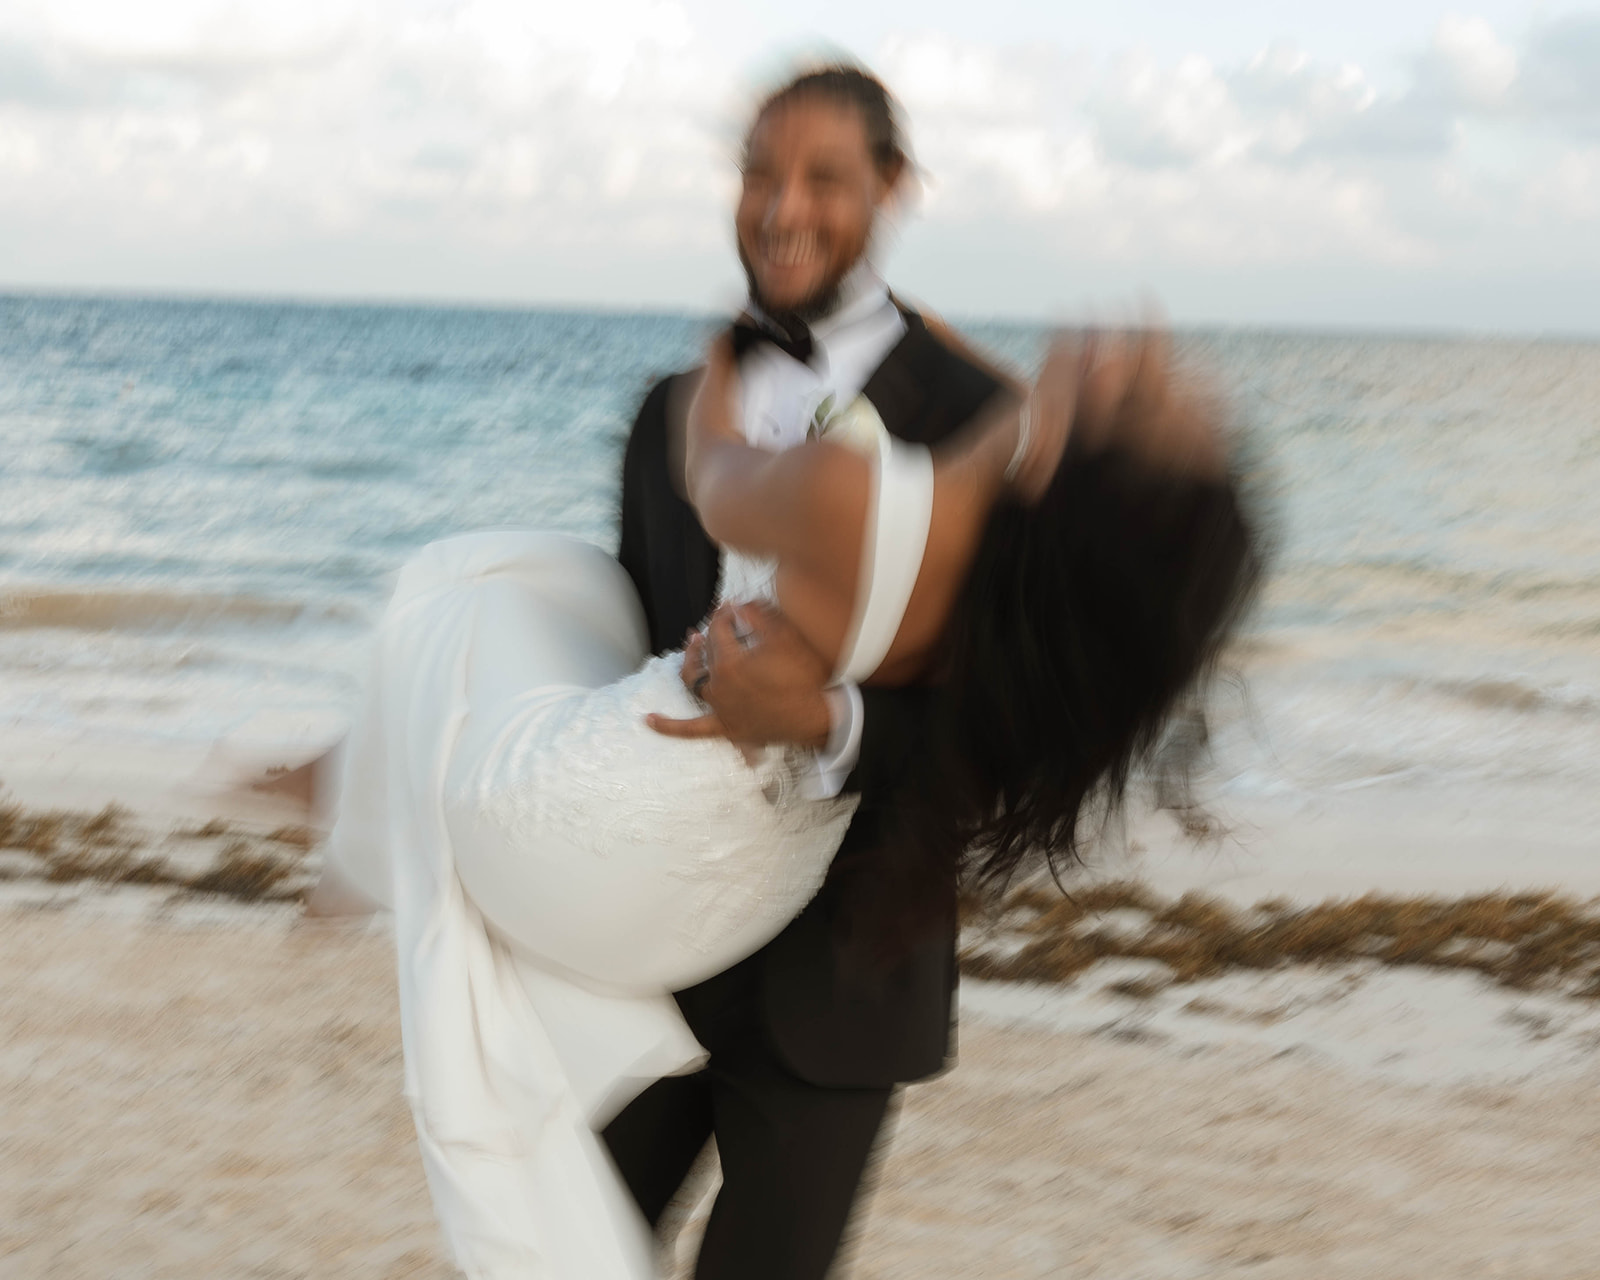 Groom carrying bride on the beach in Cancun, Mexico